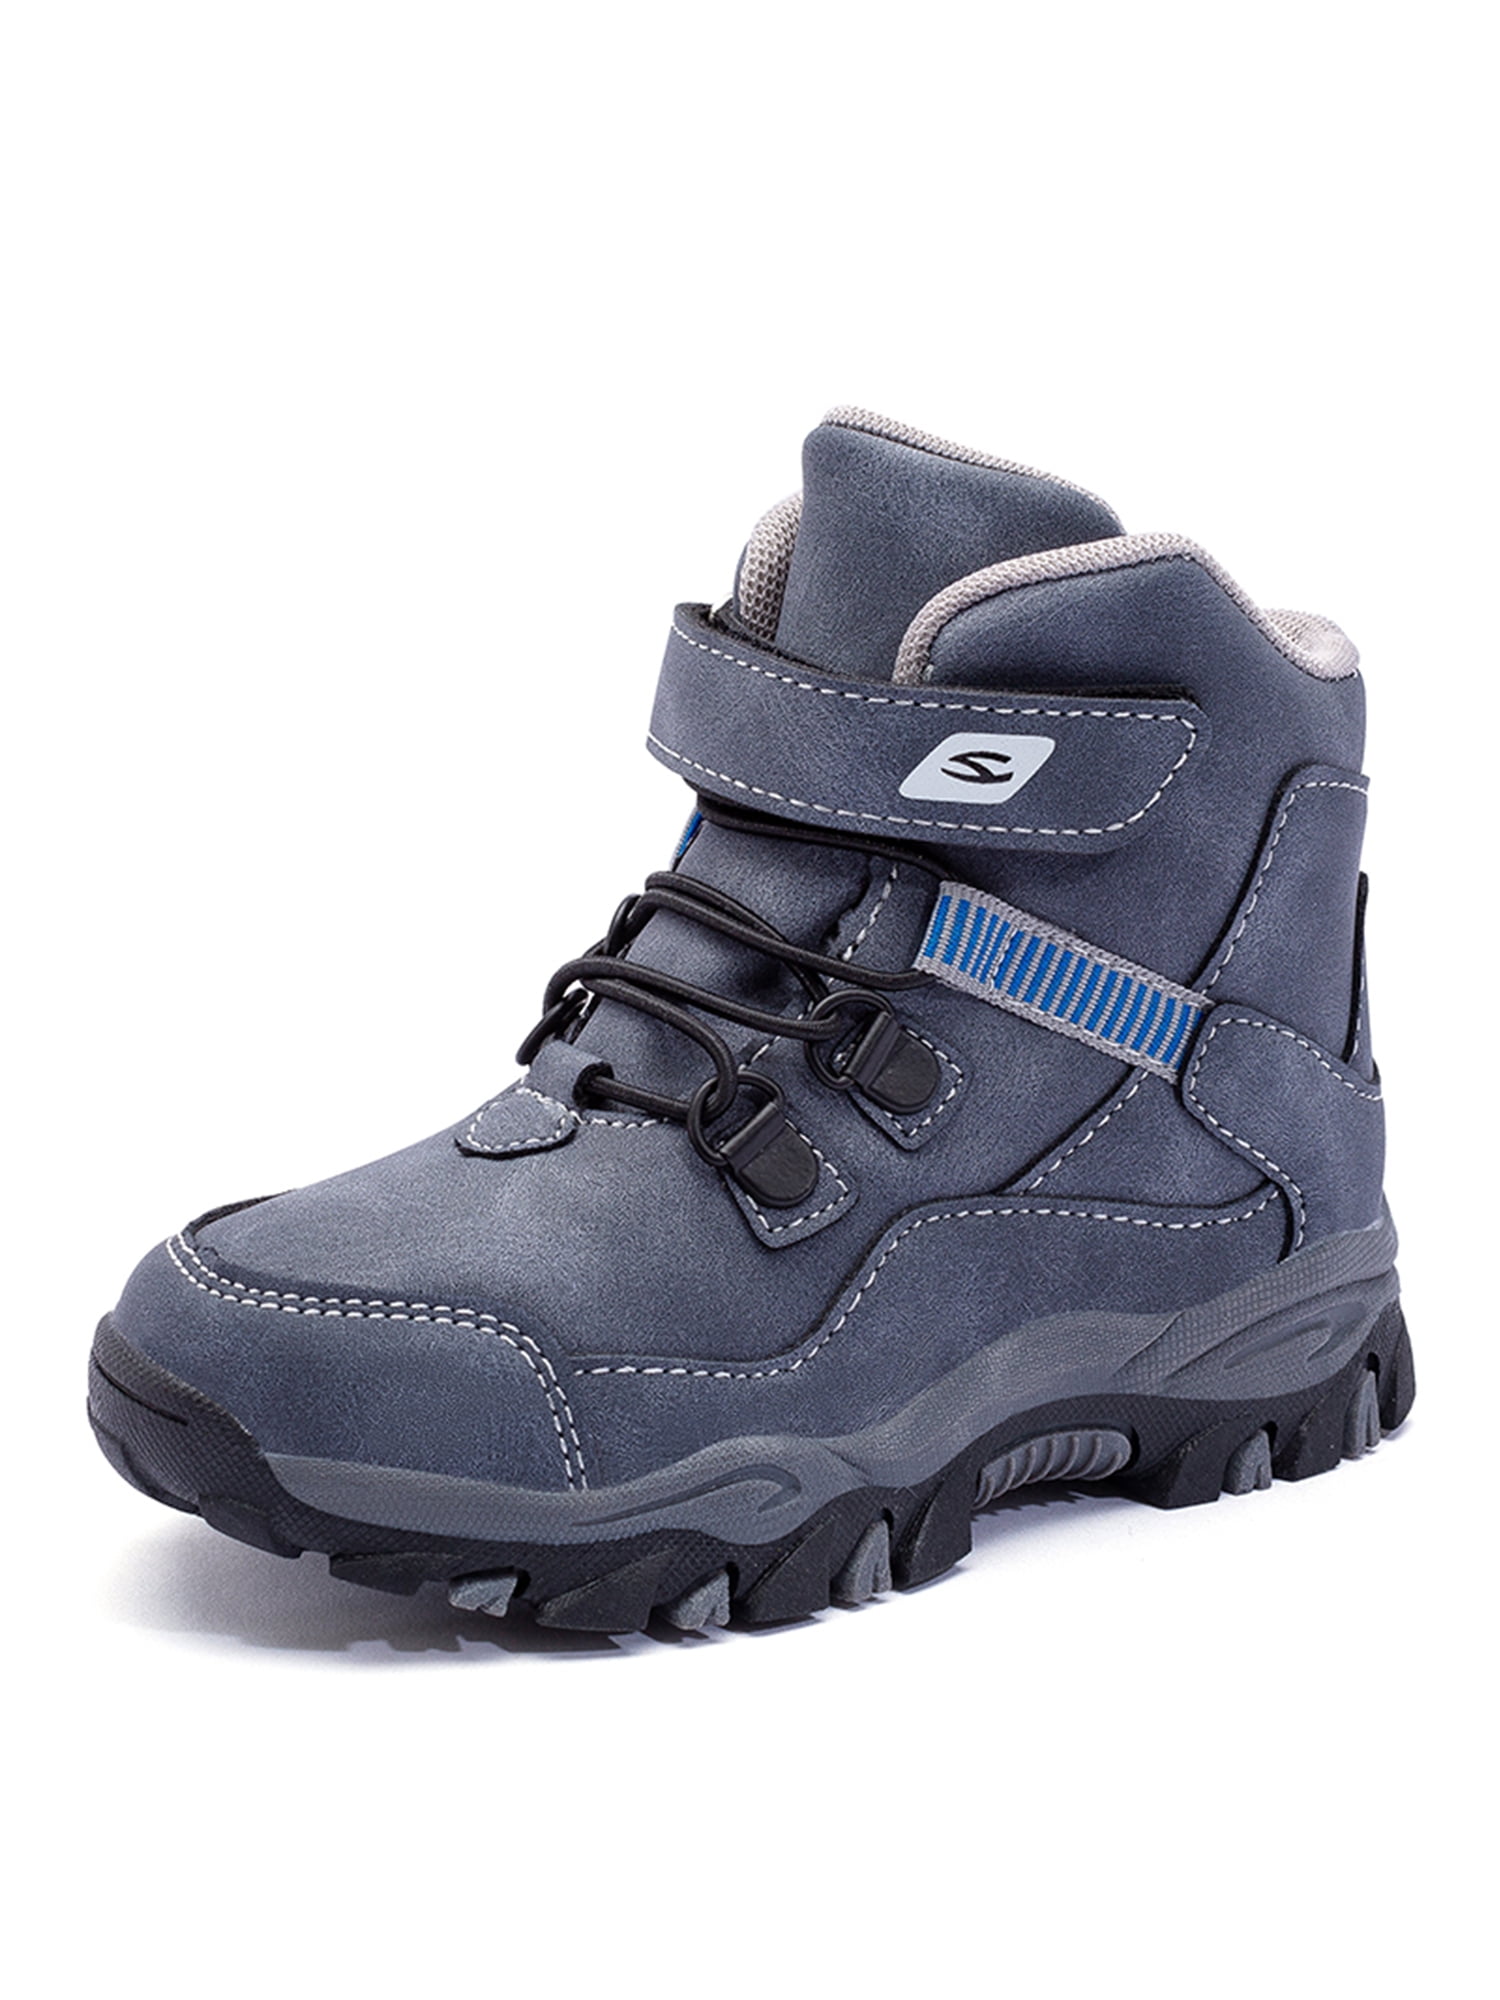 Own Shoe - New Comfortable Ankle Boots for Boys Non-Slip Lace-Up Snow ...